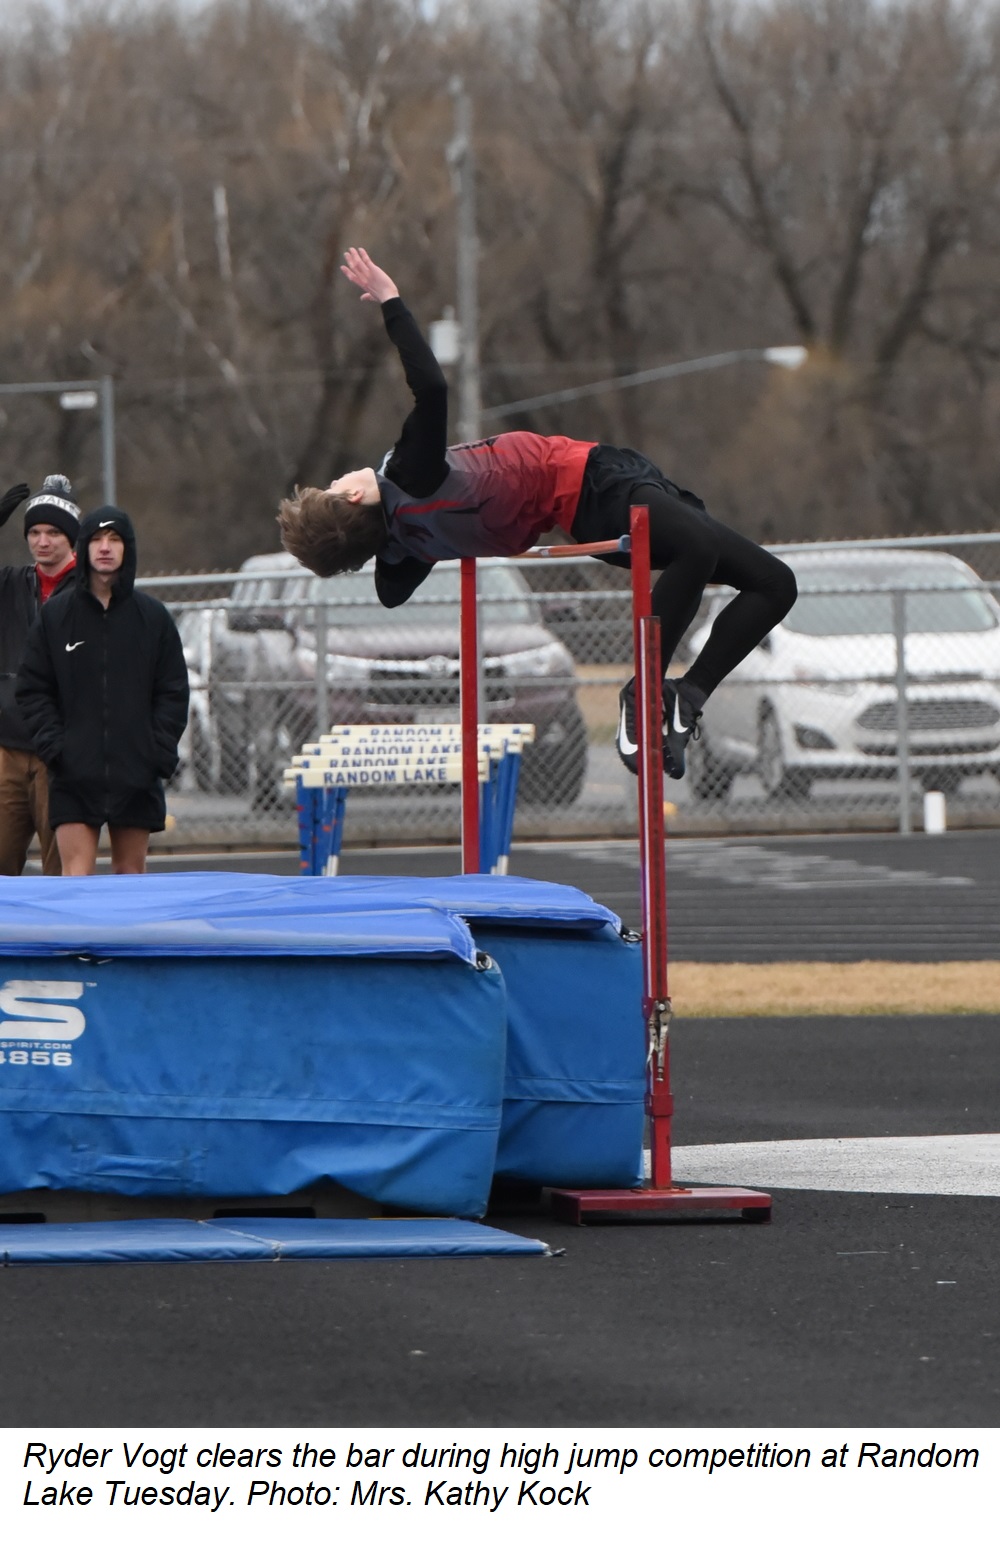 Ryder Vogt clears the bar during high jump competition at Random Lake Tuesday.